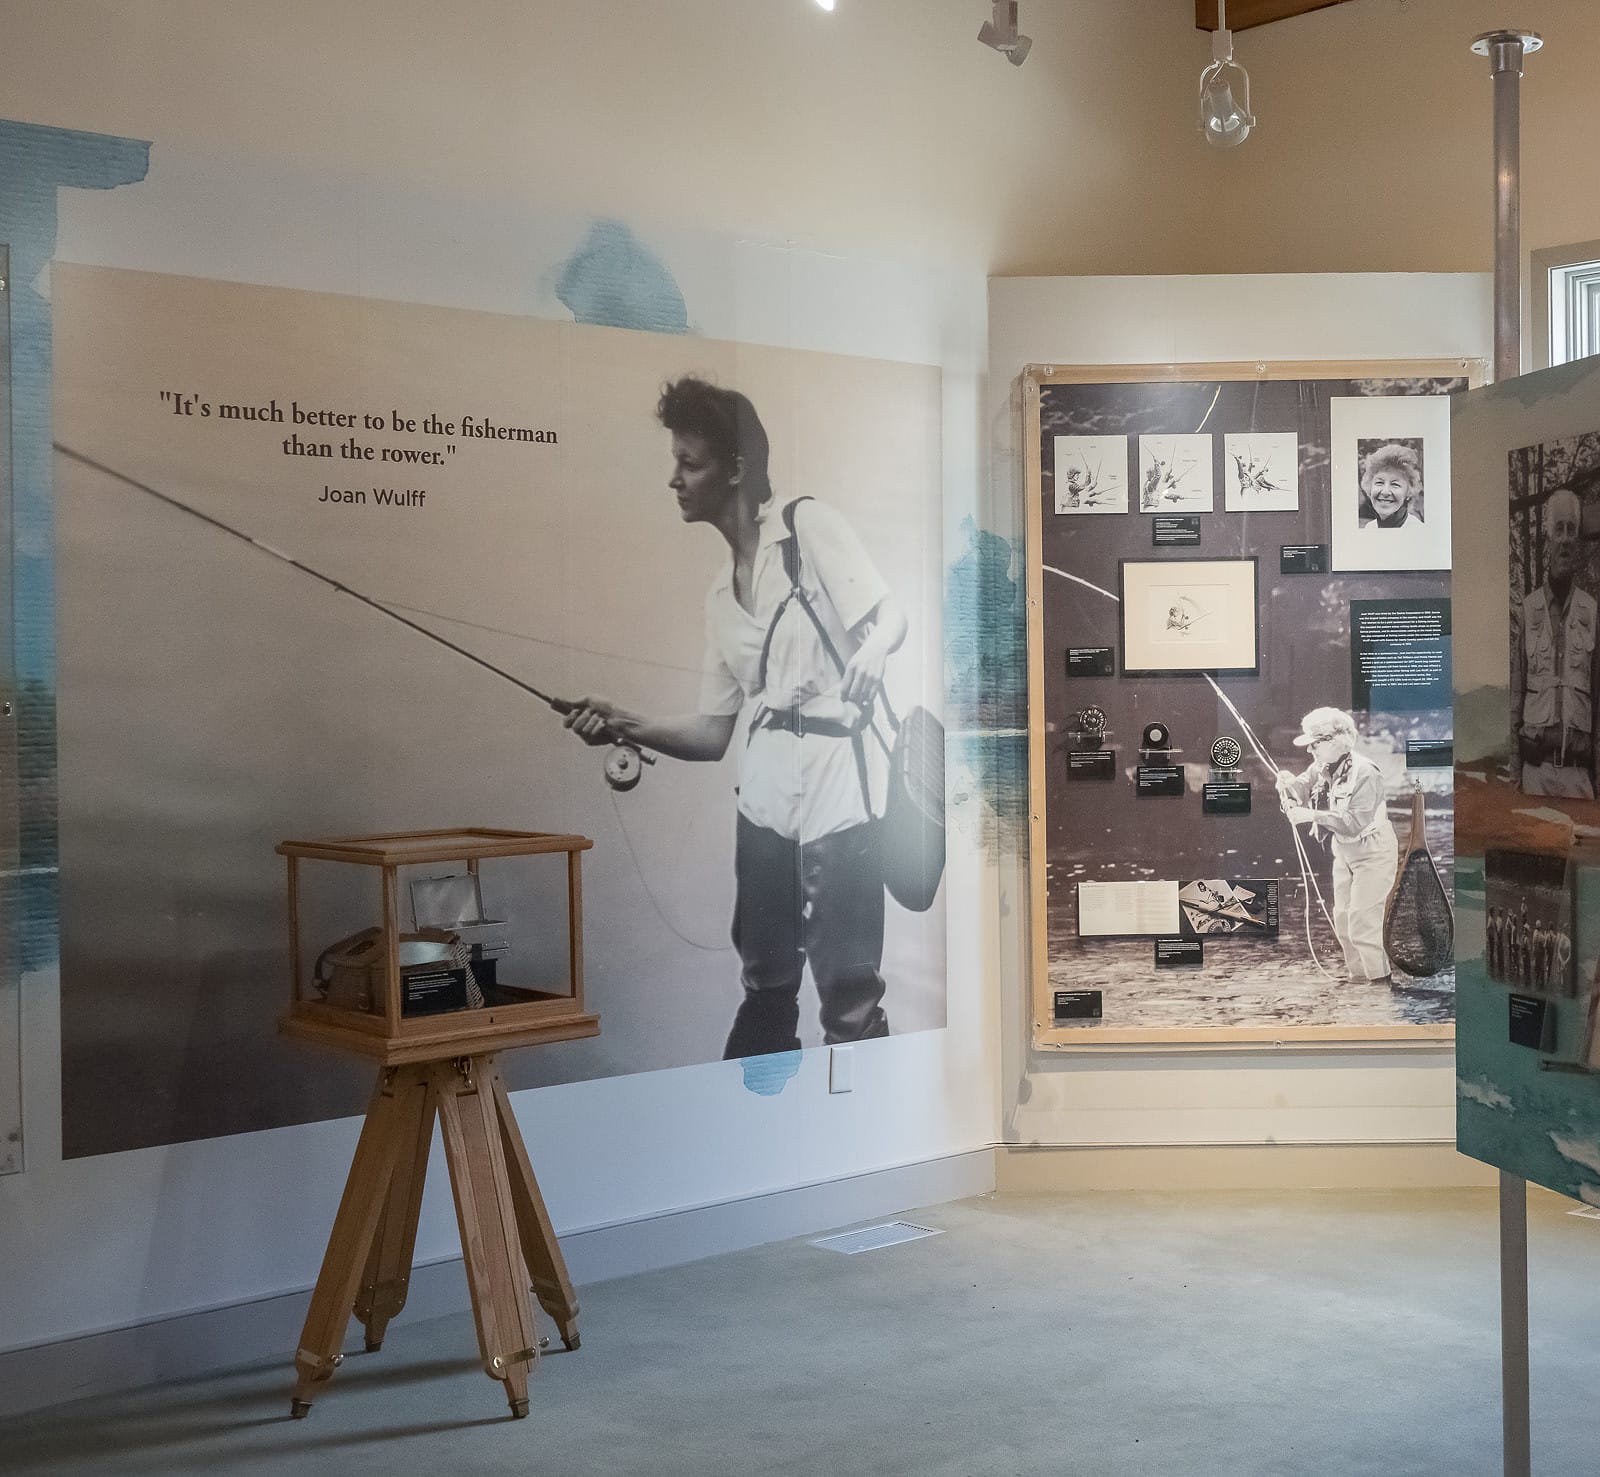 Exhibit at The Fly Fishing Museum